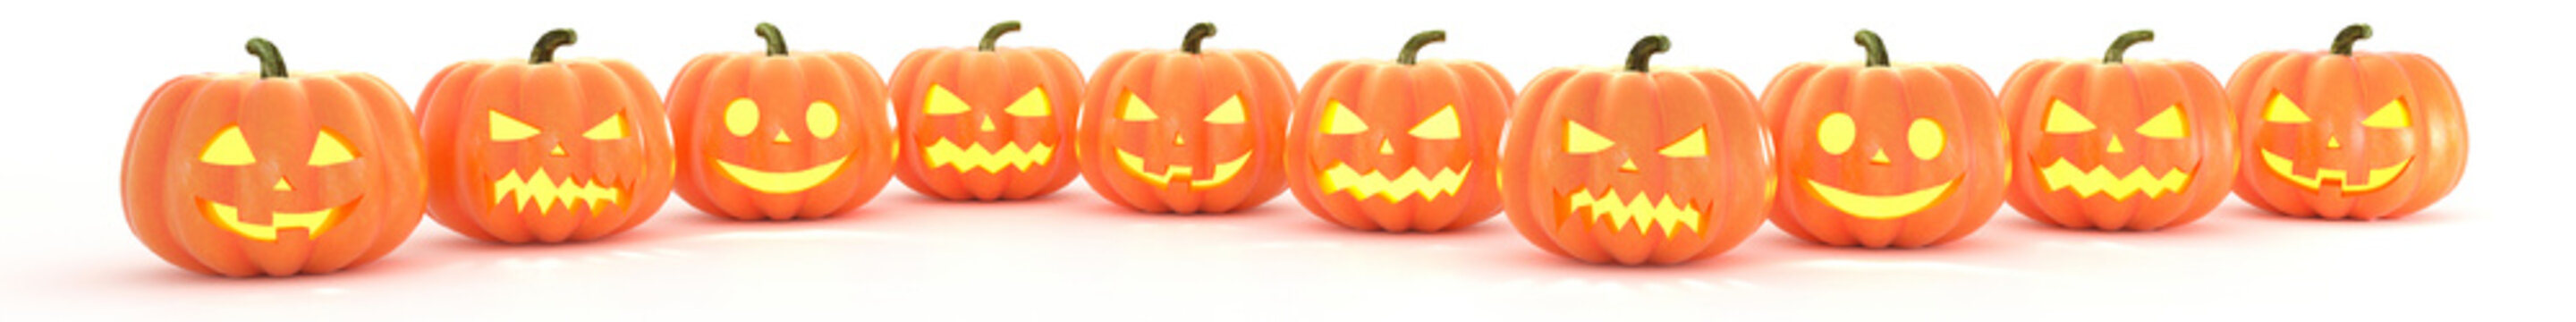 Many Halloween Pumpkins in a row isolated on white background. Wide image. 3d rendering